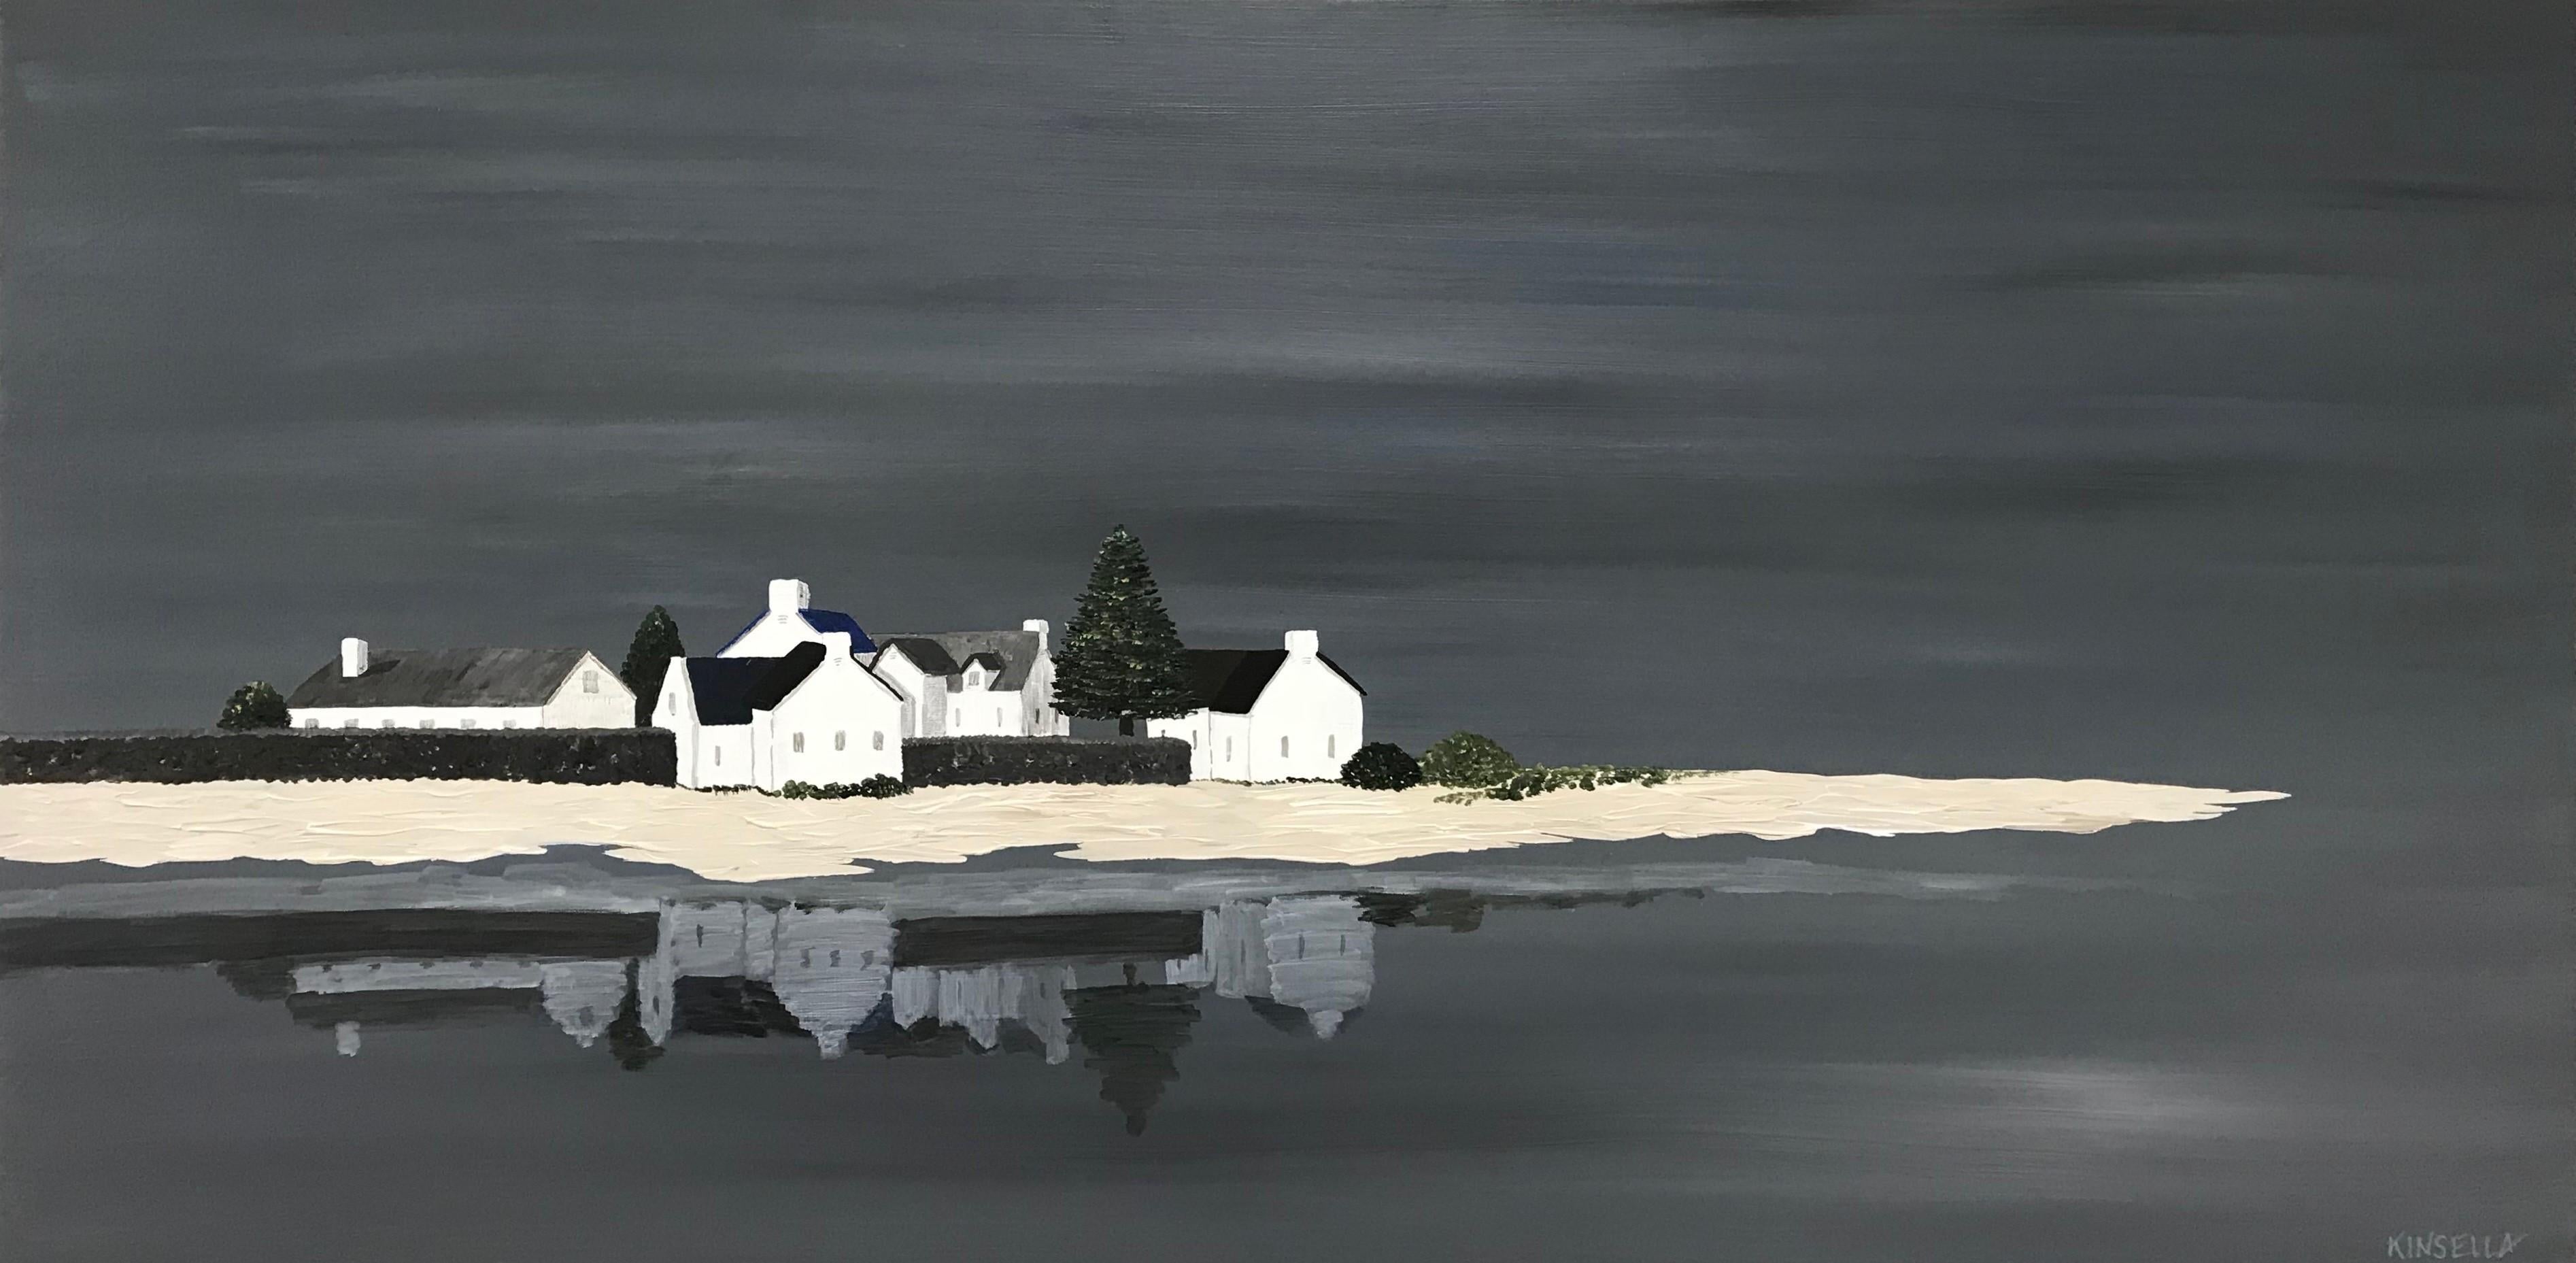 'Village Reflected' is a horizontal contemporary acrylic on canvas seascape painting created by American artist Susan Kinsella in 2018. Featuring a strong palette made of dark grey, beige and dark green colors, the painting strikes by its use of